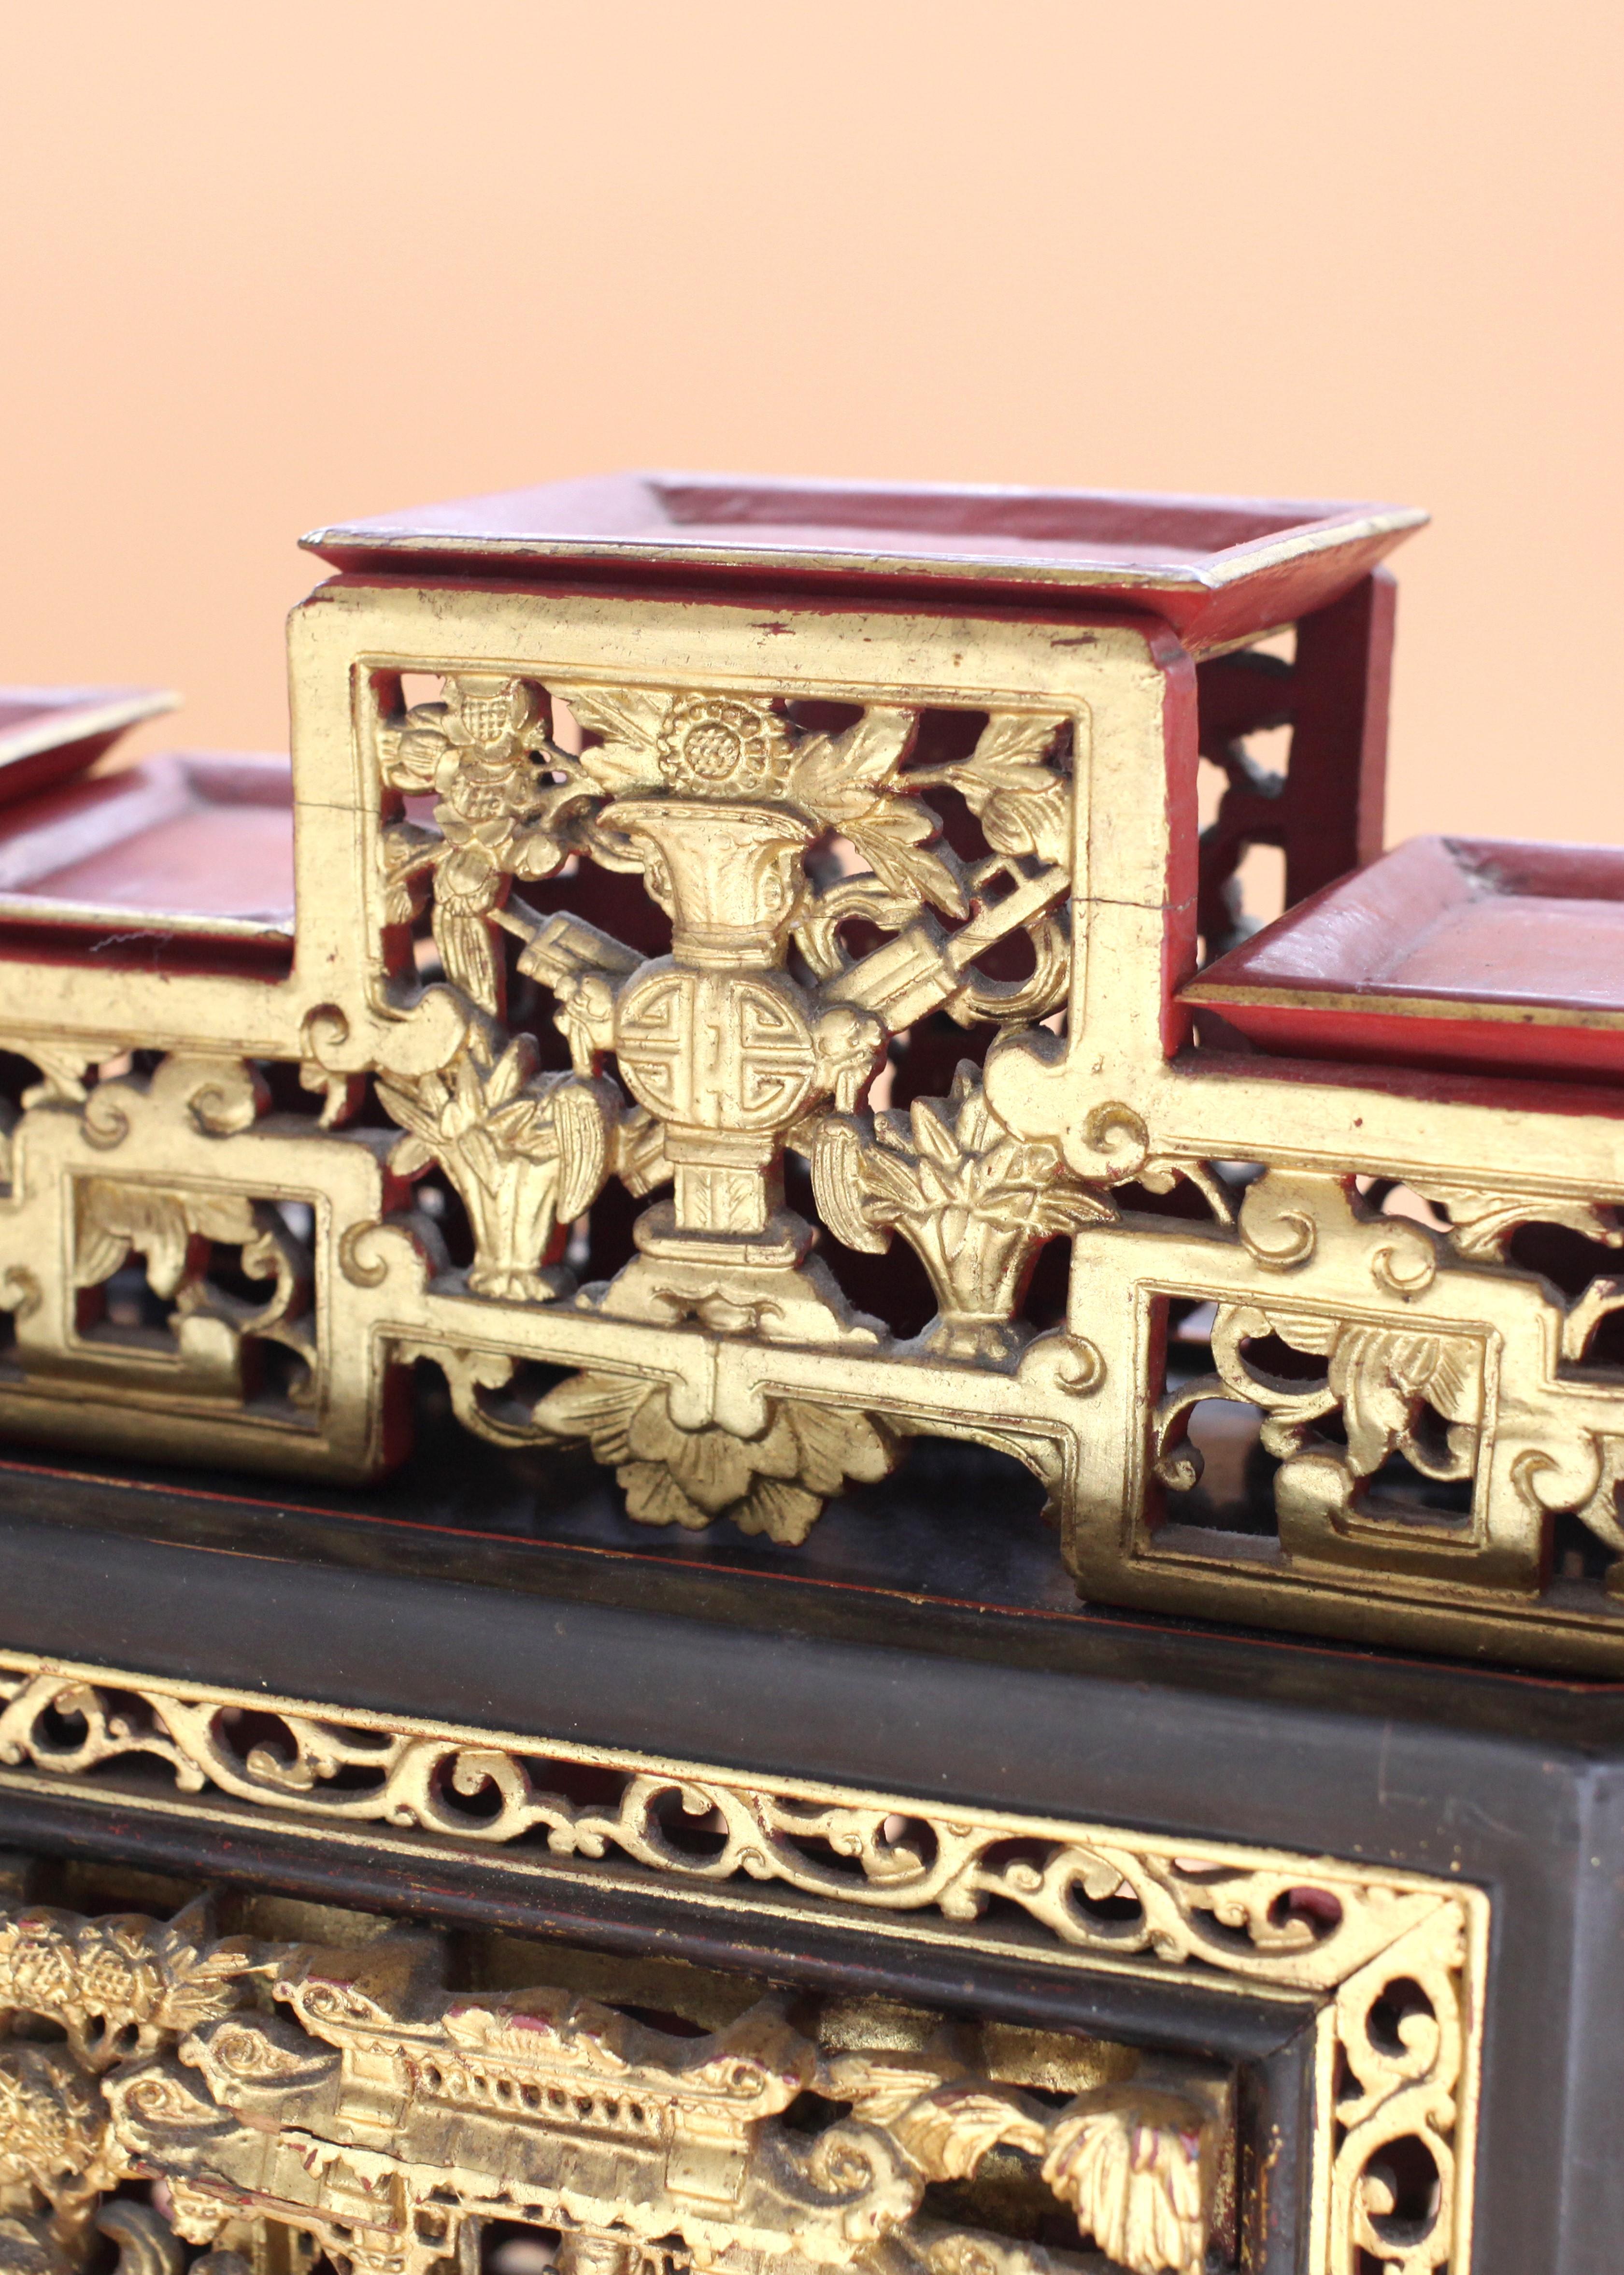 Dive into a piece of Asian craftsmanship with this 19th Century Straits Chinese Chanab. Composed of lacquered and gilded wood, this piece showcases the intricate detailing the Straits Chinese were known for. The provenance of the piece is as